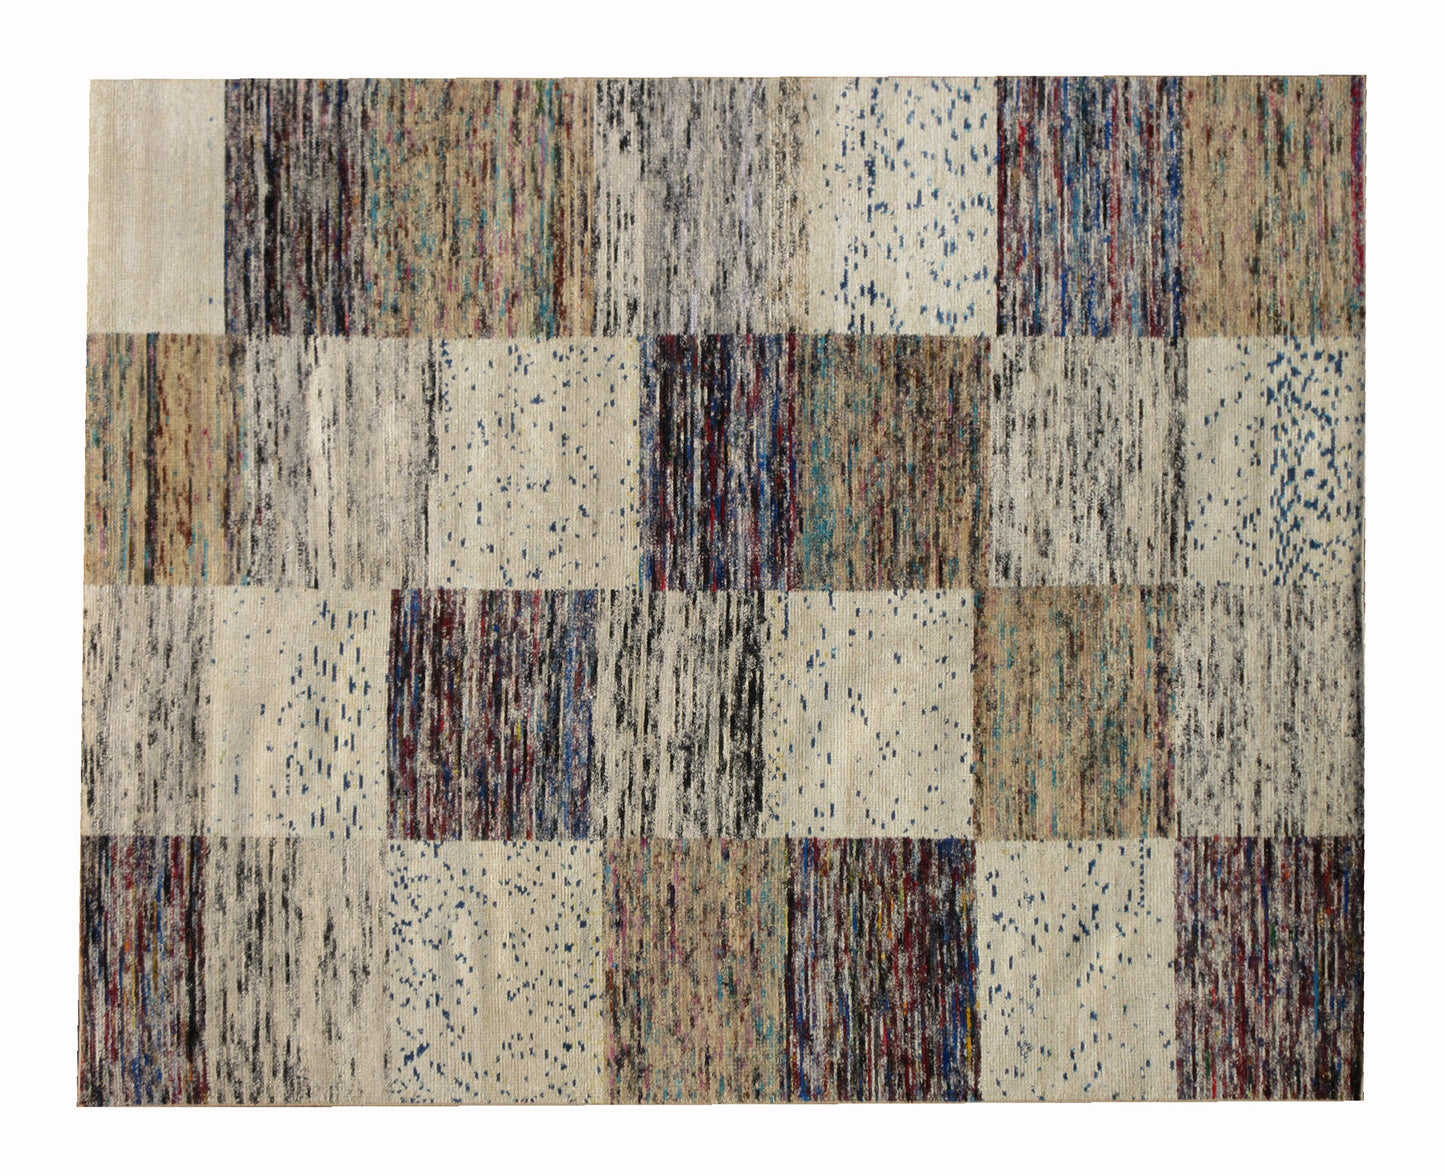 8X10 Modern Hand-Knotted Silk Area Rug